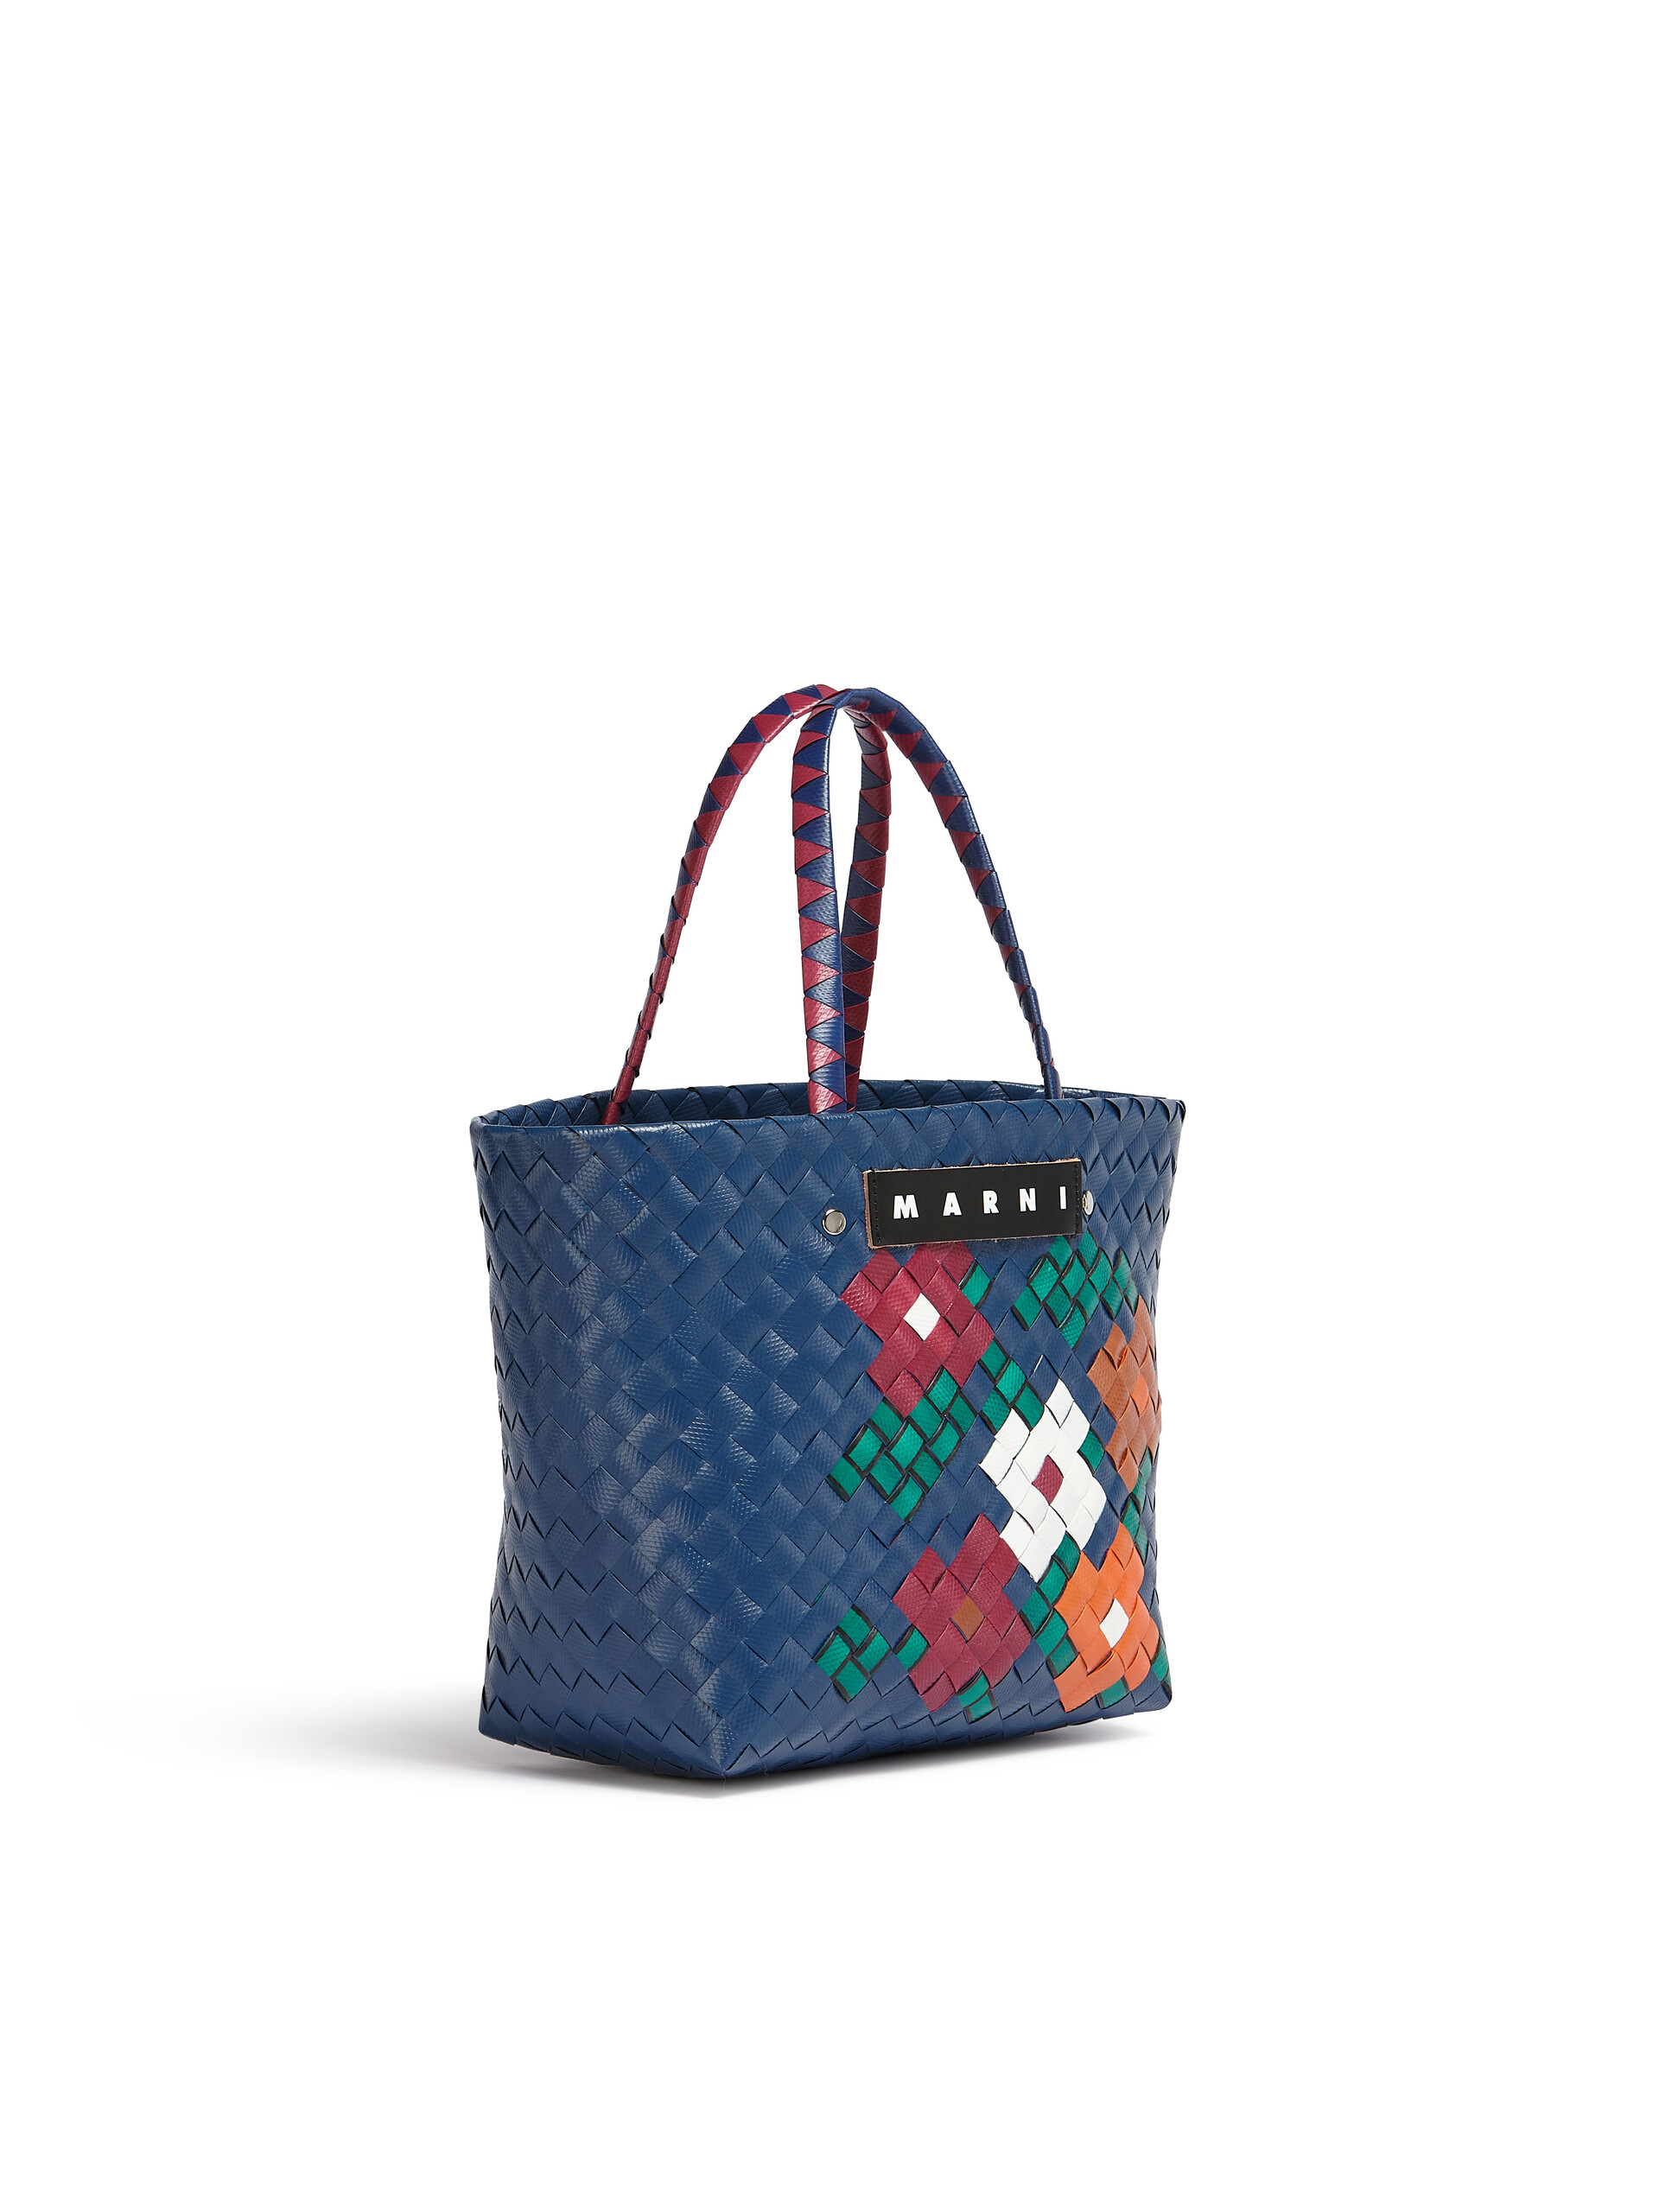 MARNI MARKET small bag in blue flower motif - Shopping Bags - Image 2